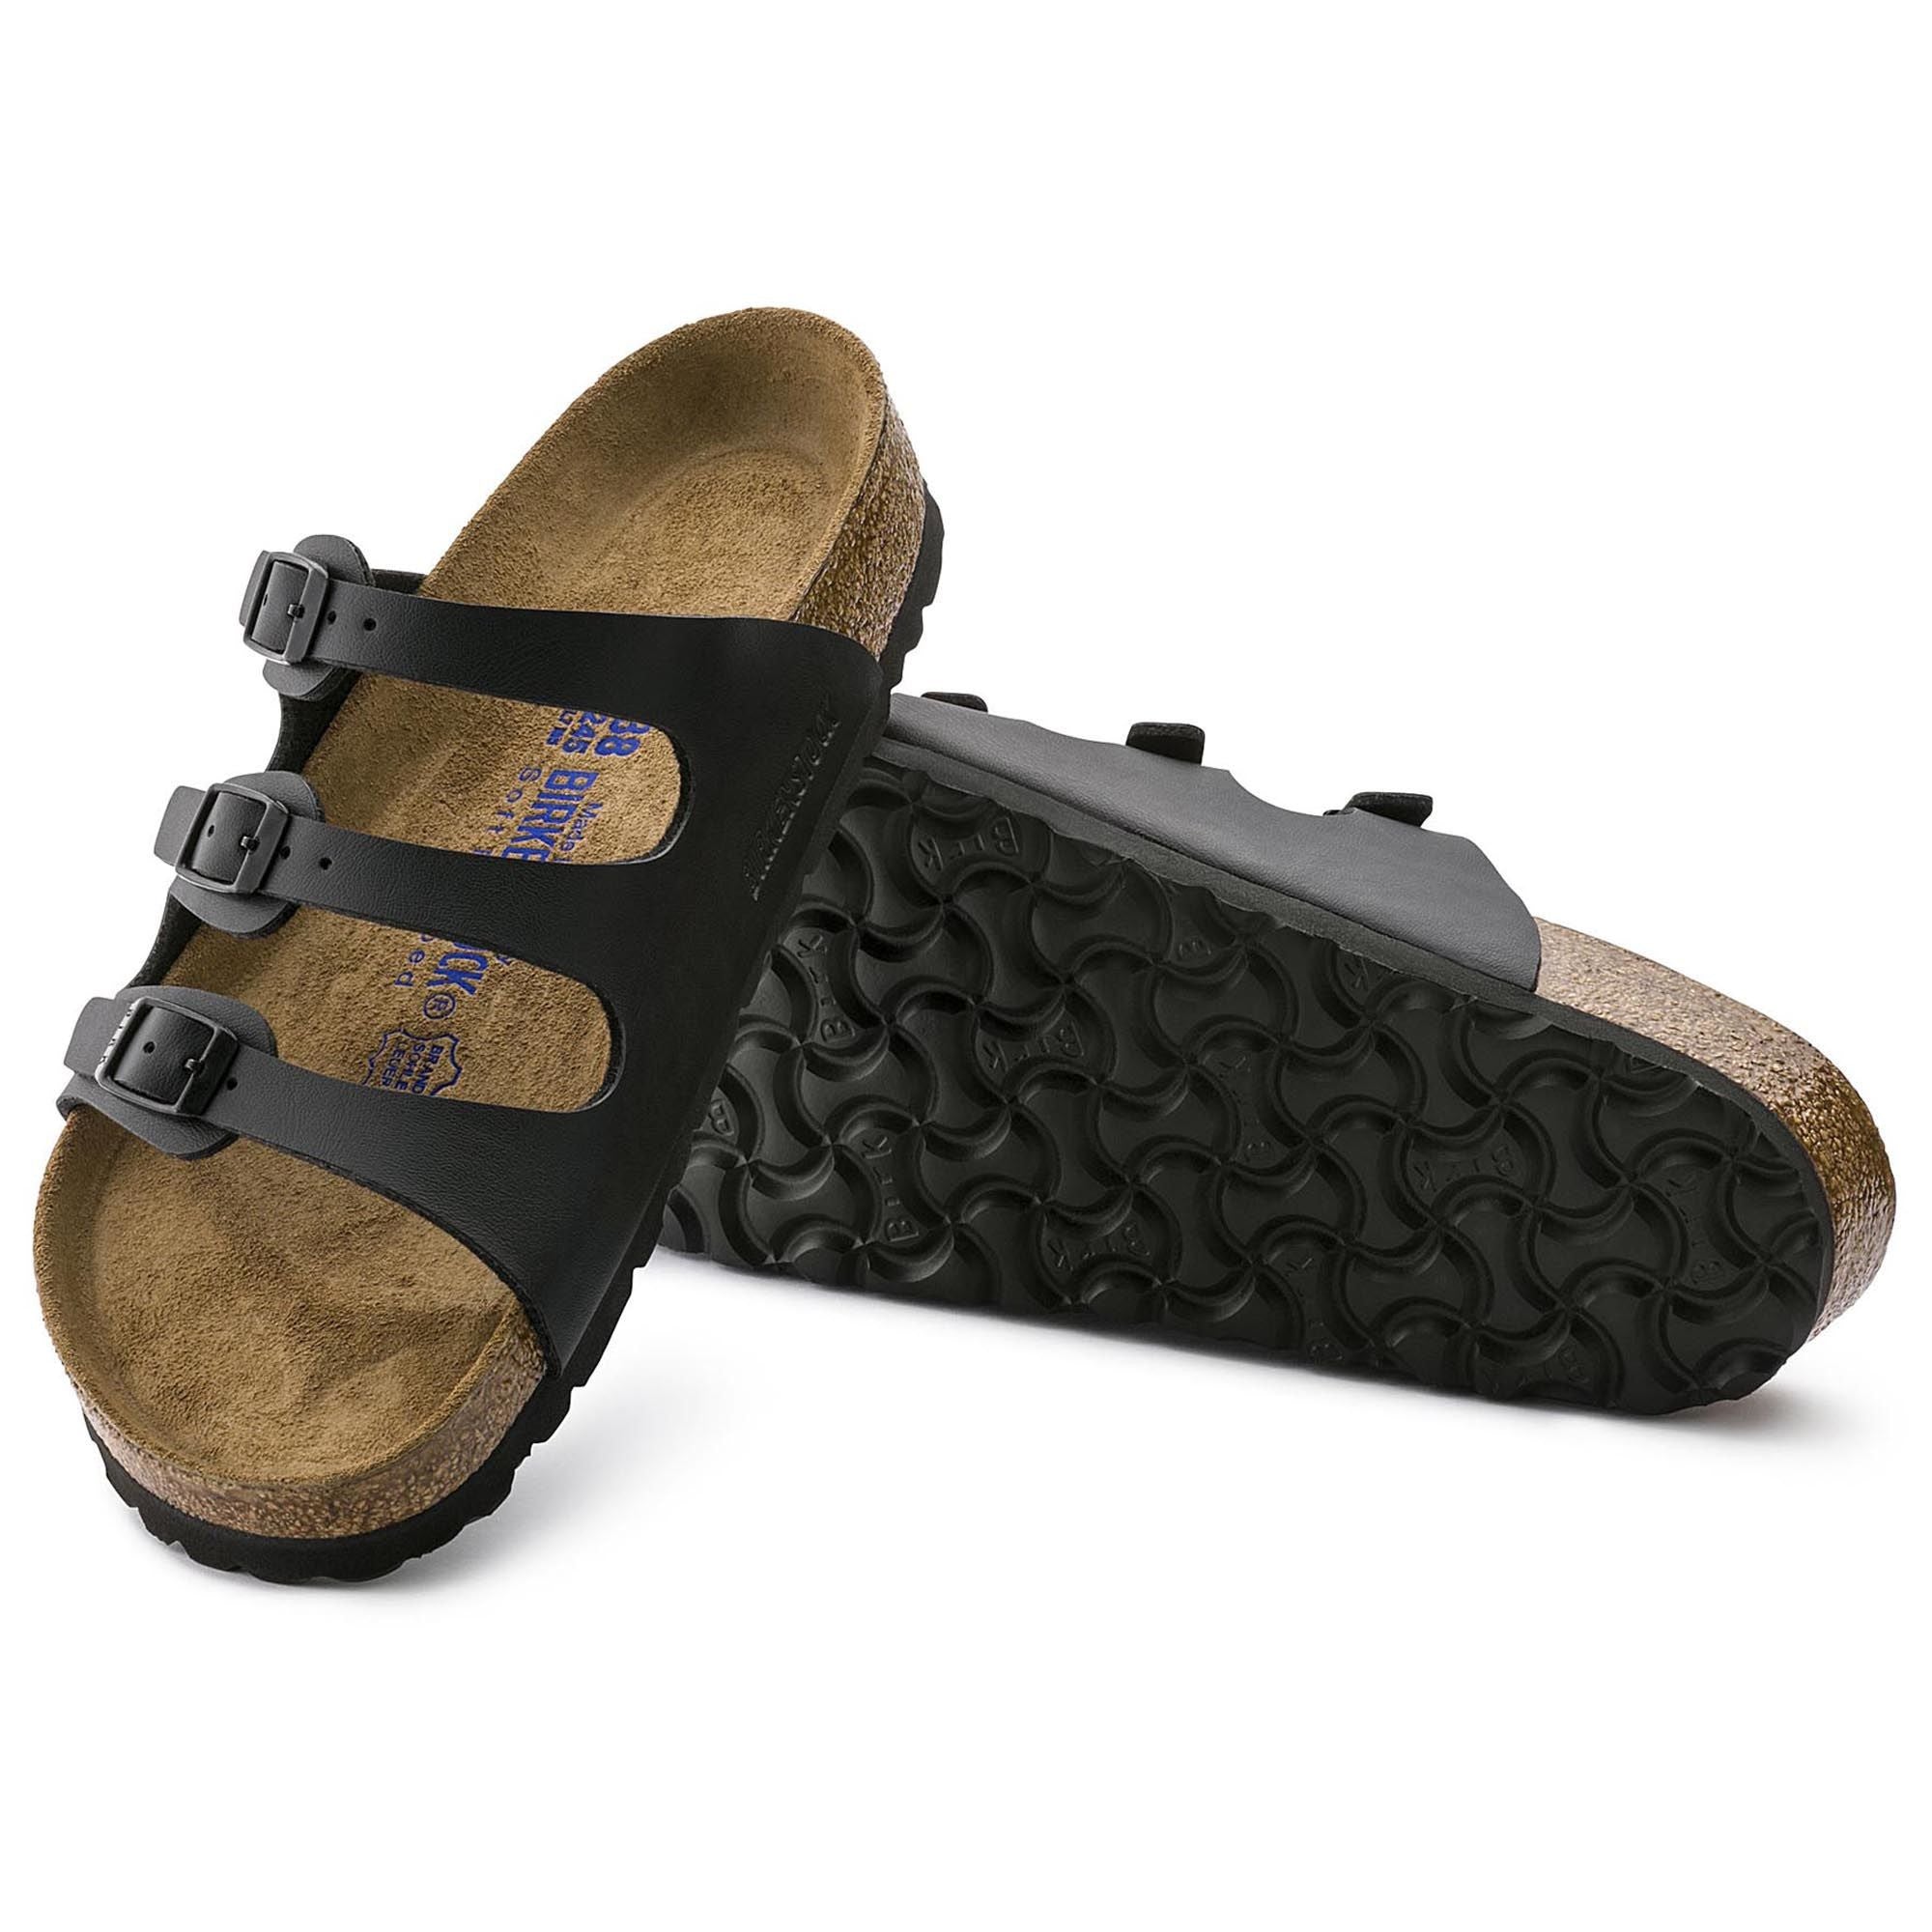 Florida Soft Footbed : Black Synthetic